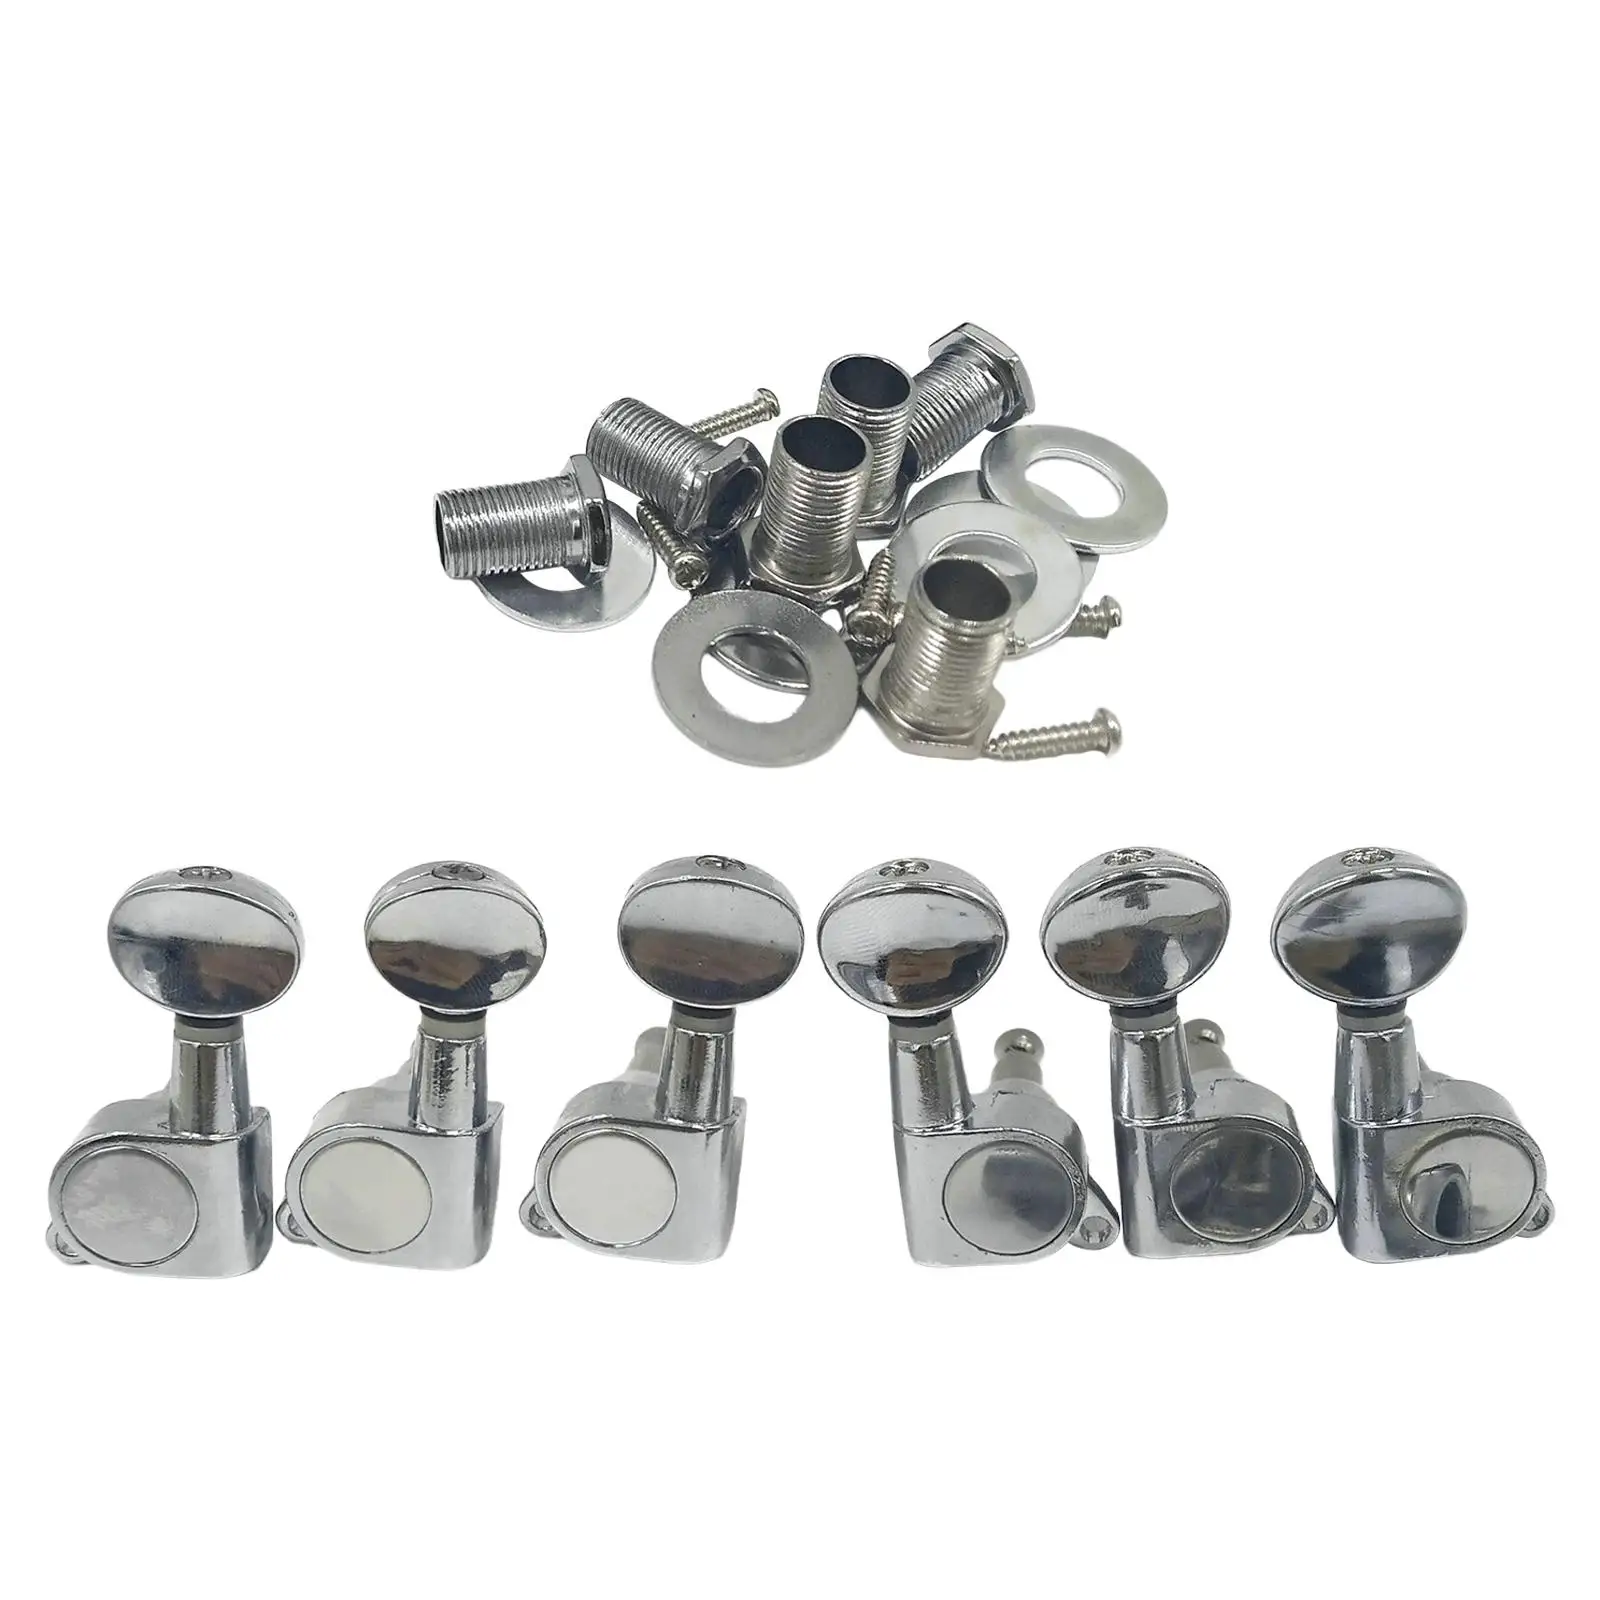 6x Guitar 3L 3R Sealed String Button Tuning Pegs for Acoustic Guitar Parts